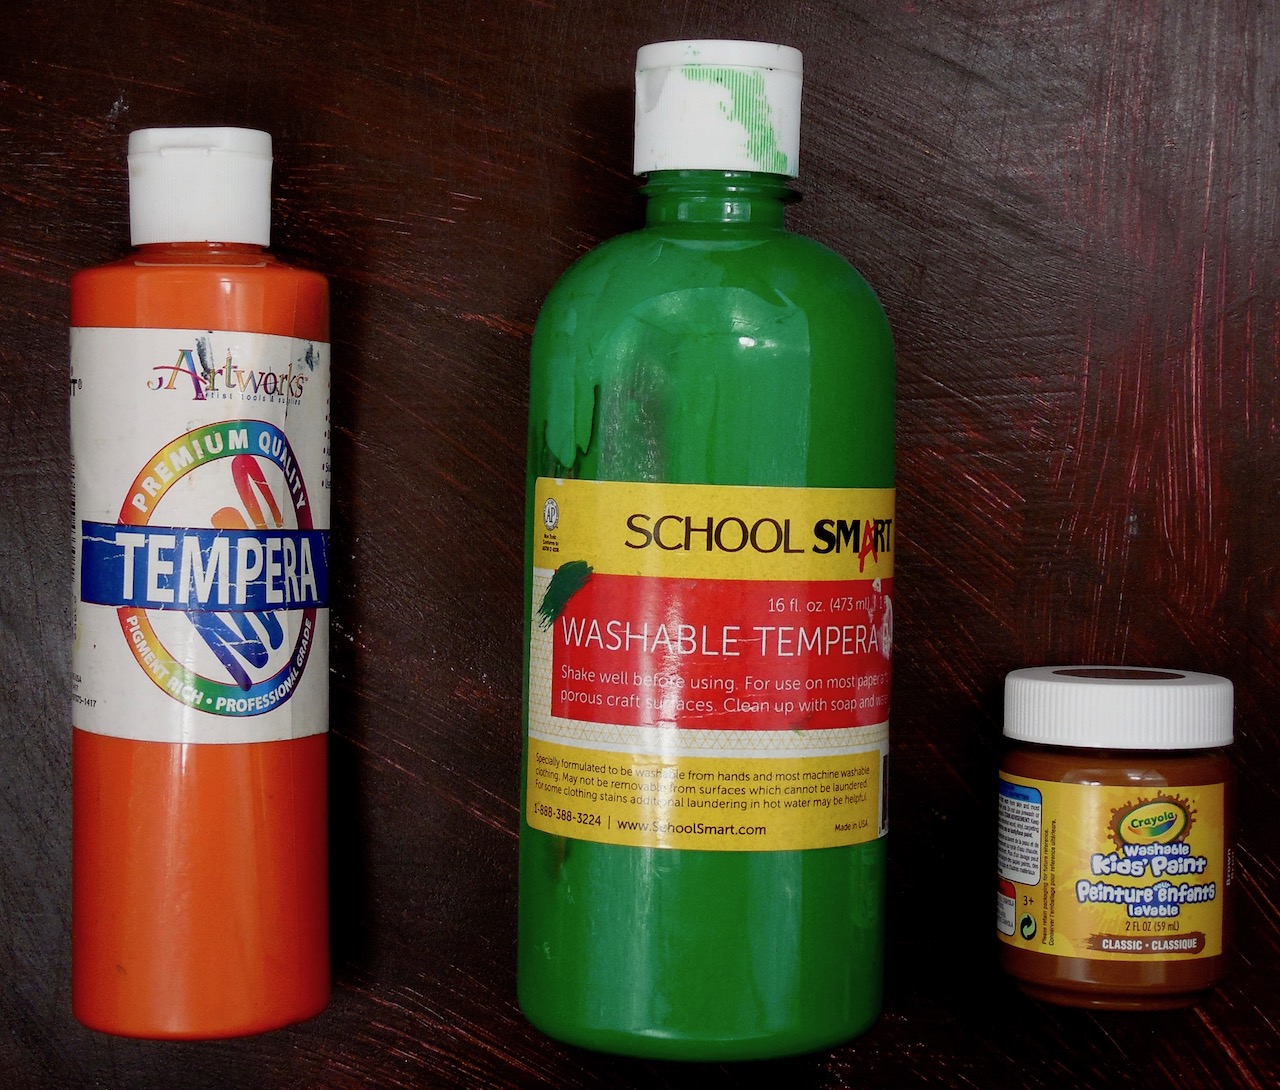 The three tempera paints for the art project